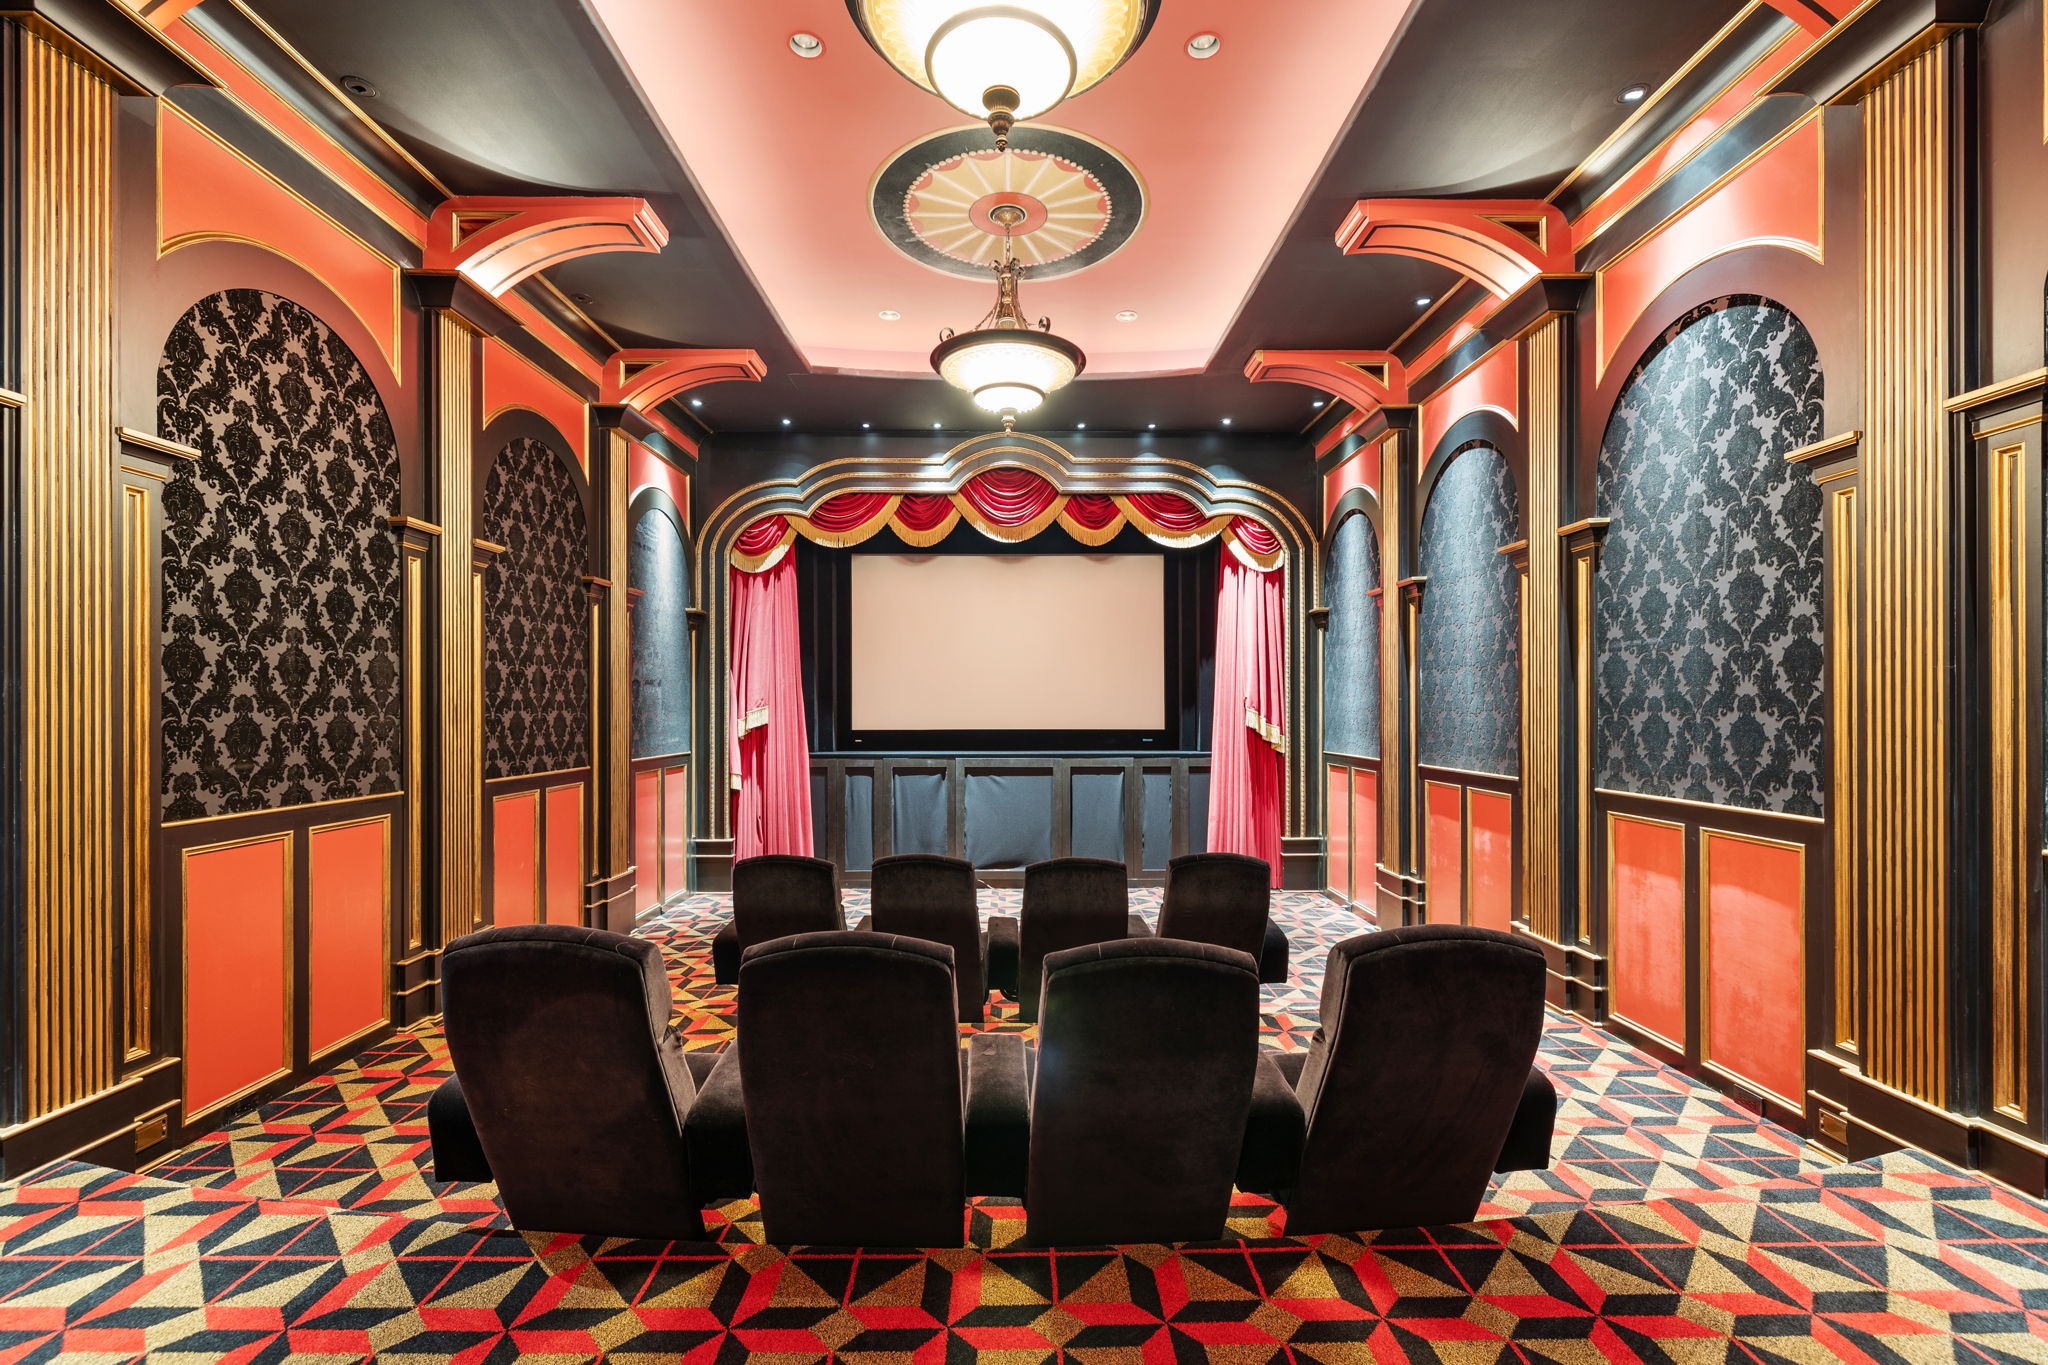 The Majestic Movie Theatre includes a recently updated 4K-HD Projector system and crystal clear sound.  Let the world disappear while you are enthralled by the latest thriller, weepy from the latest romance, or falling off the recliner laughing with the latest slapstick comedy film.